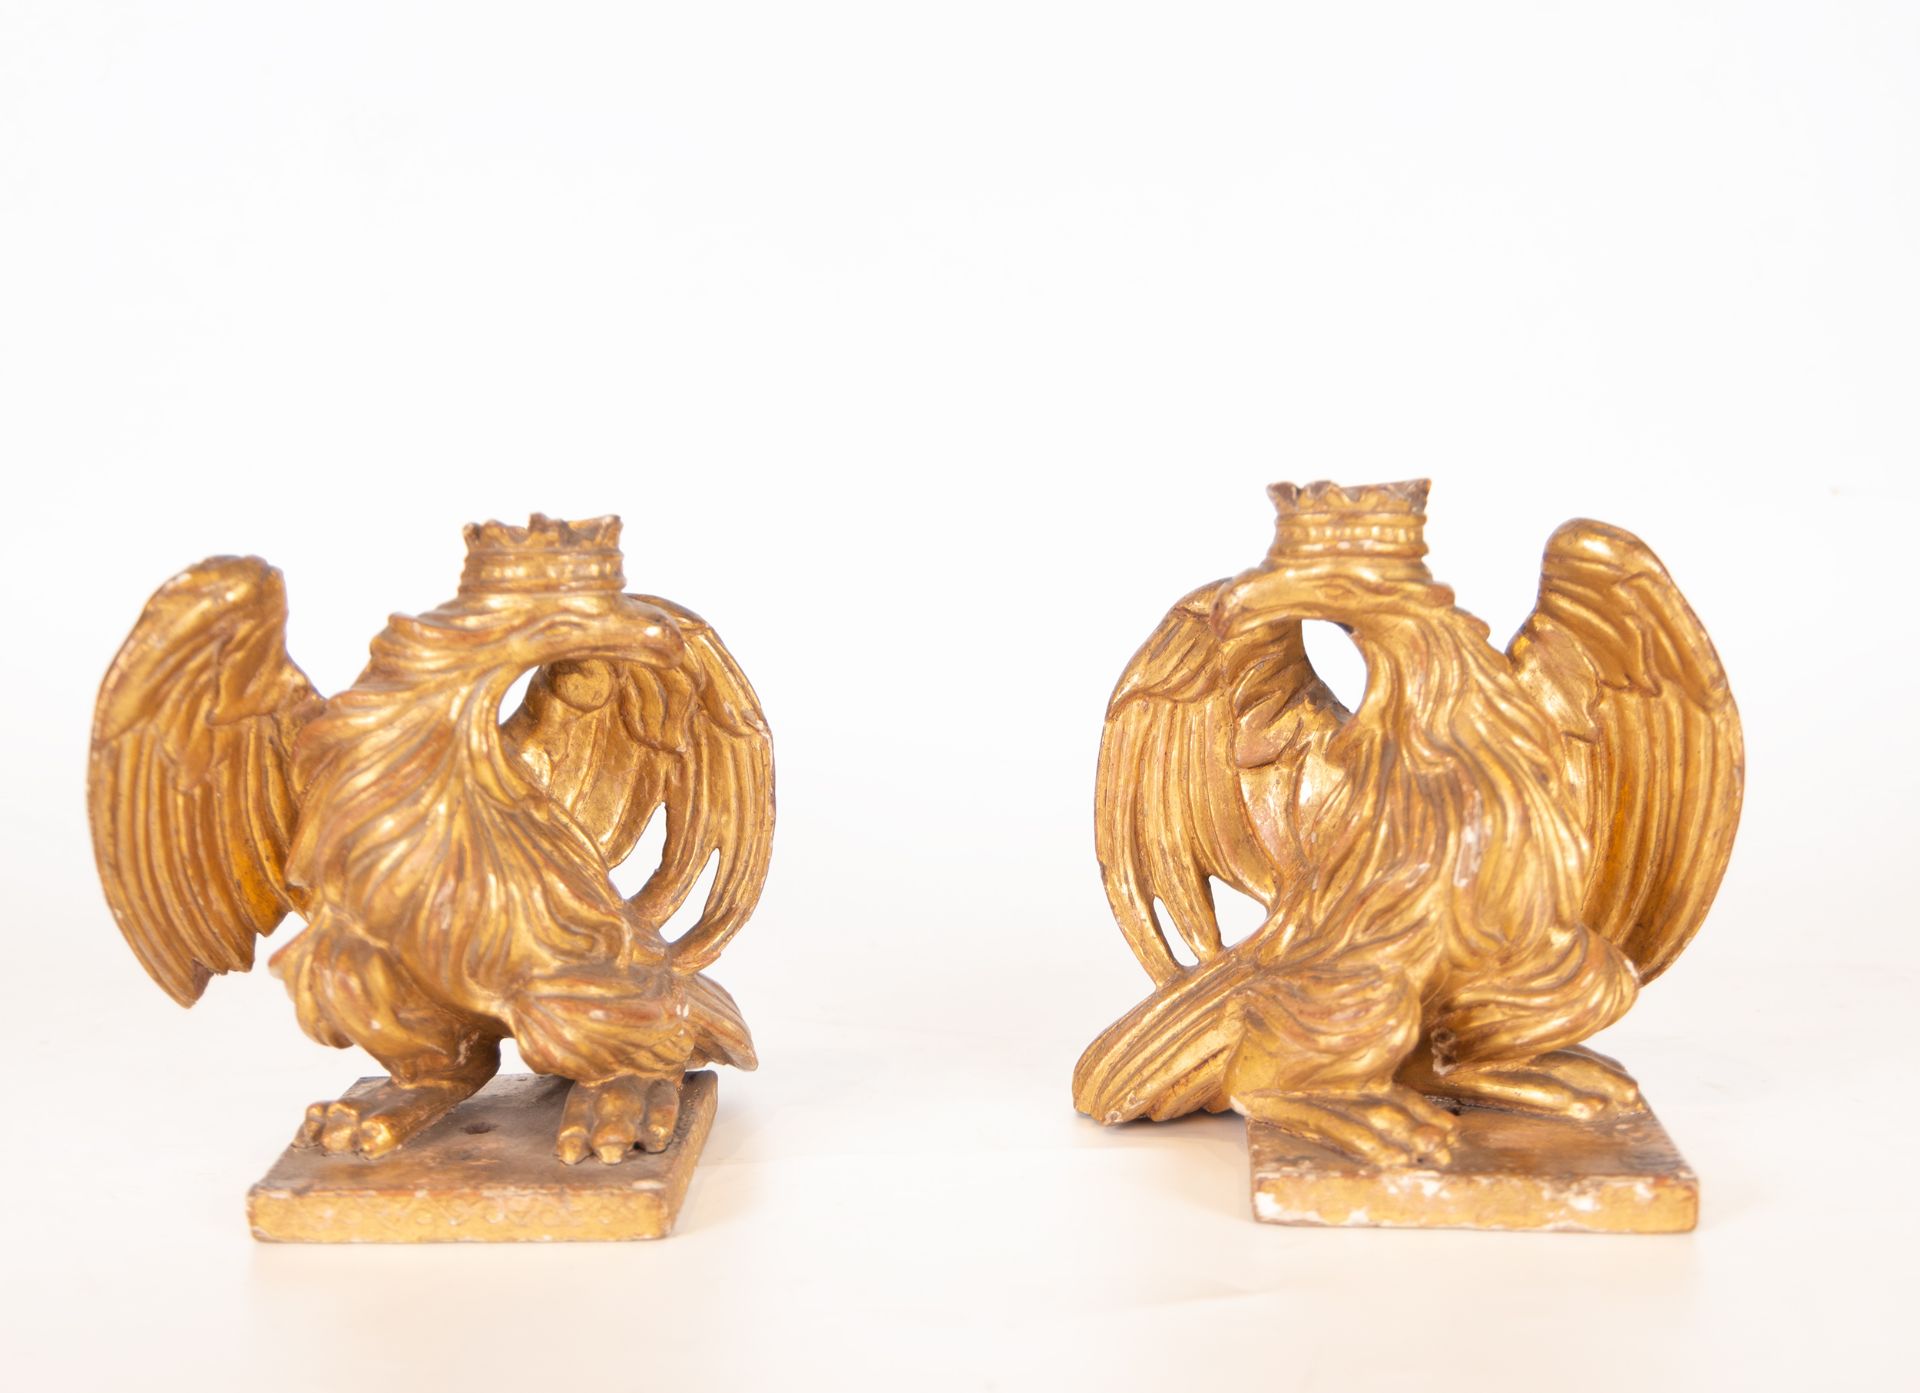 Pair of Crowned Eagles finials, Italian school of the 18th century